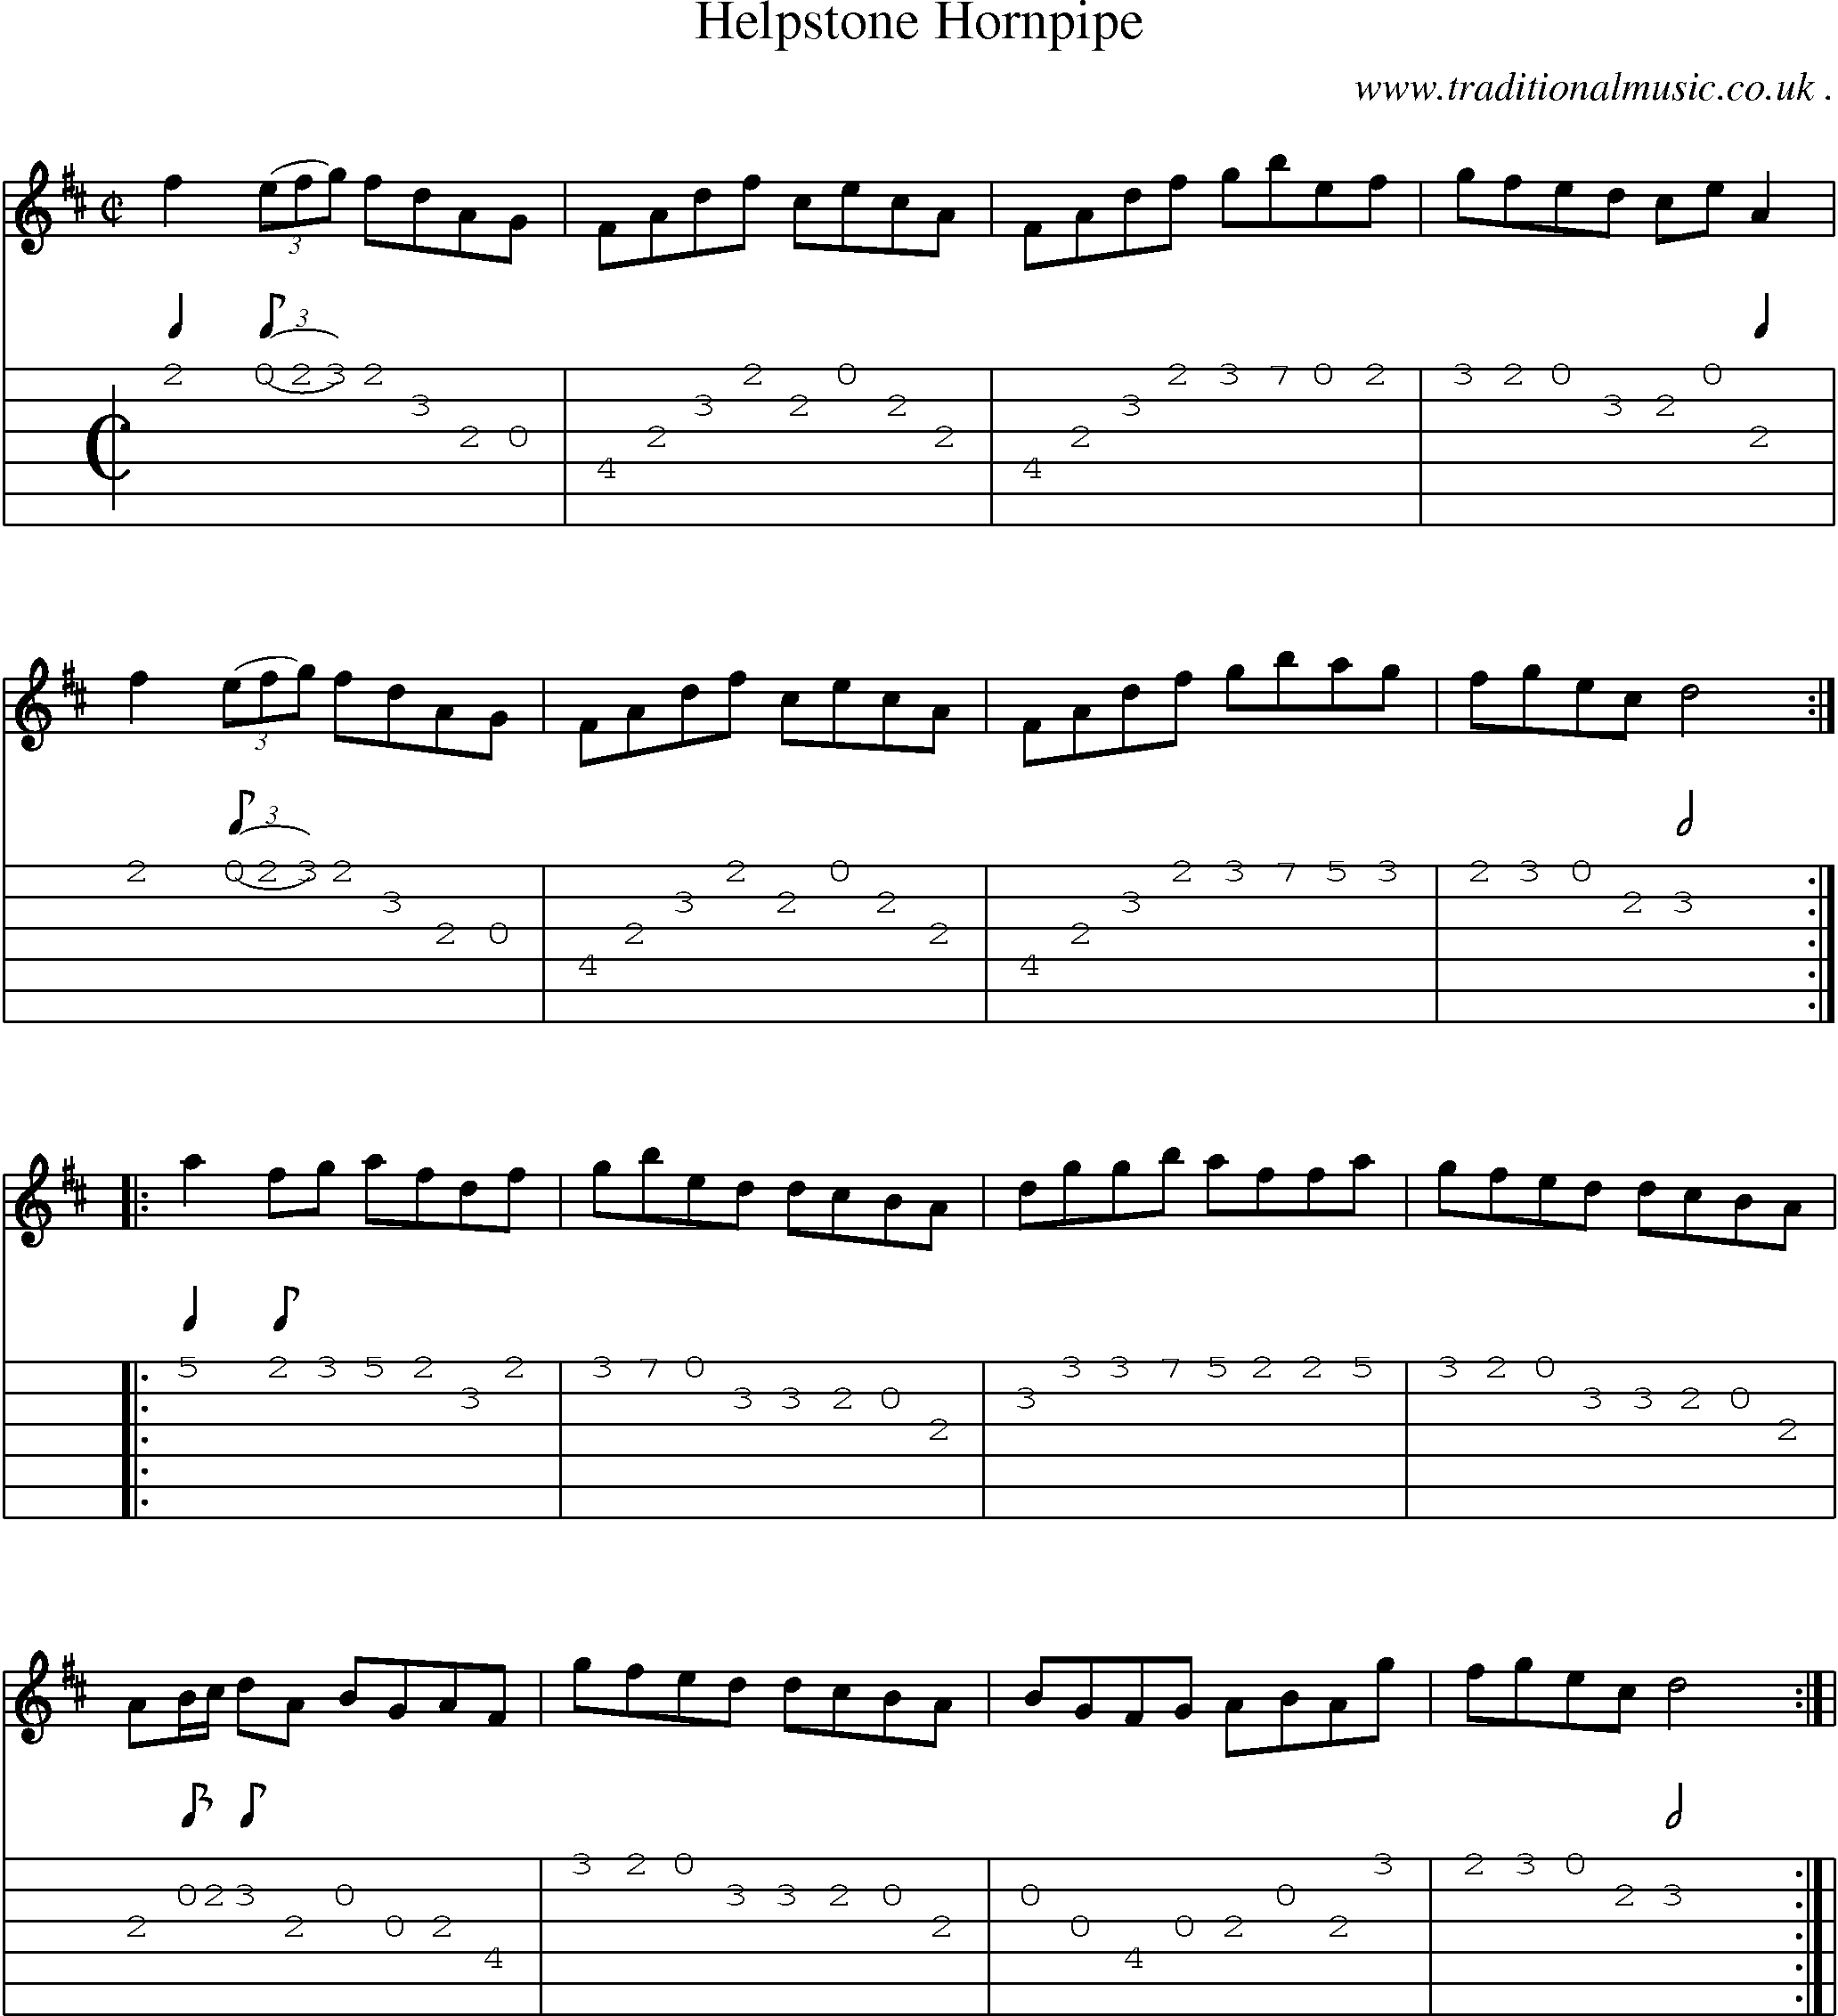 Sheet-Music and Guitar Tabs for Helpstone Hornpipe